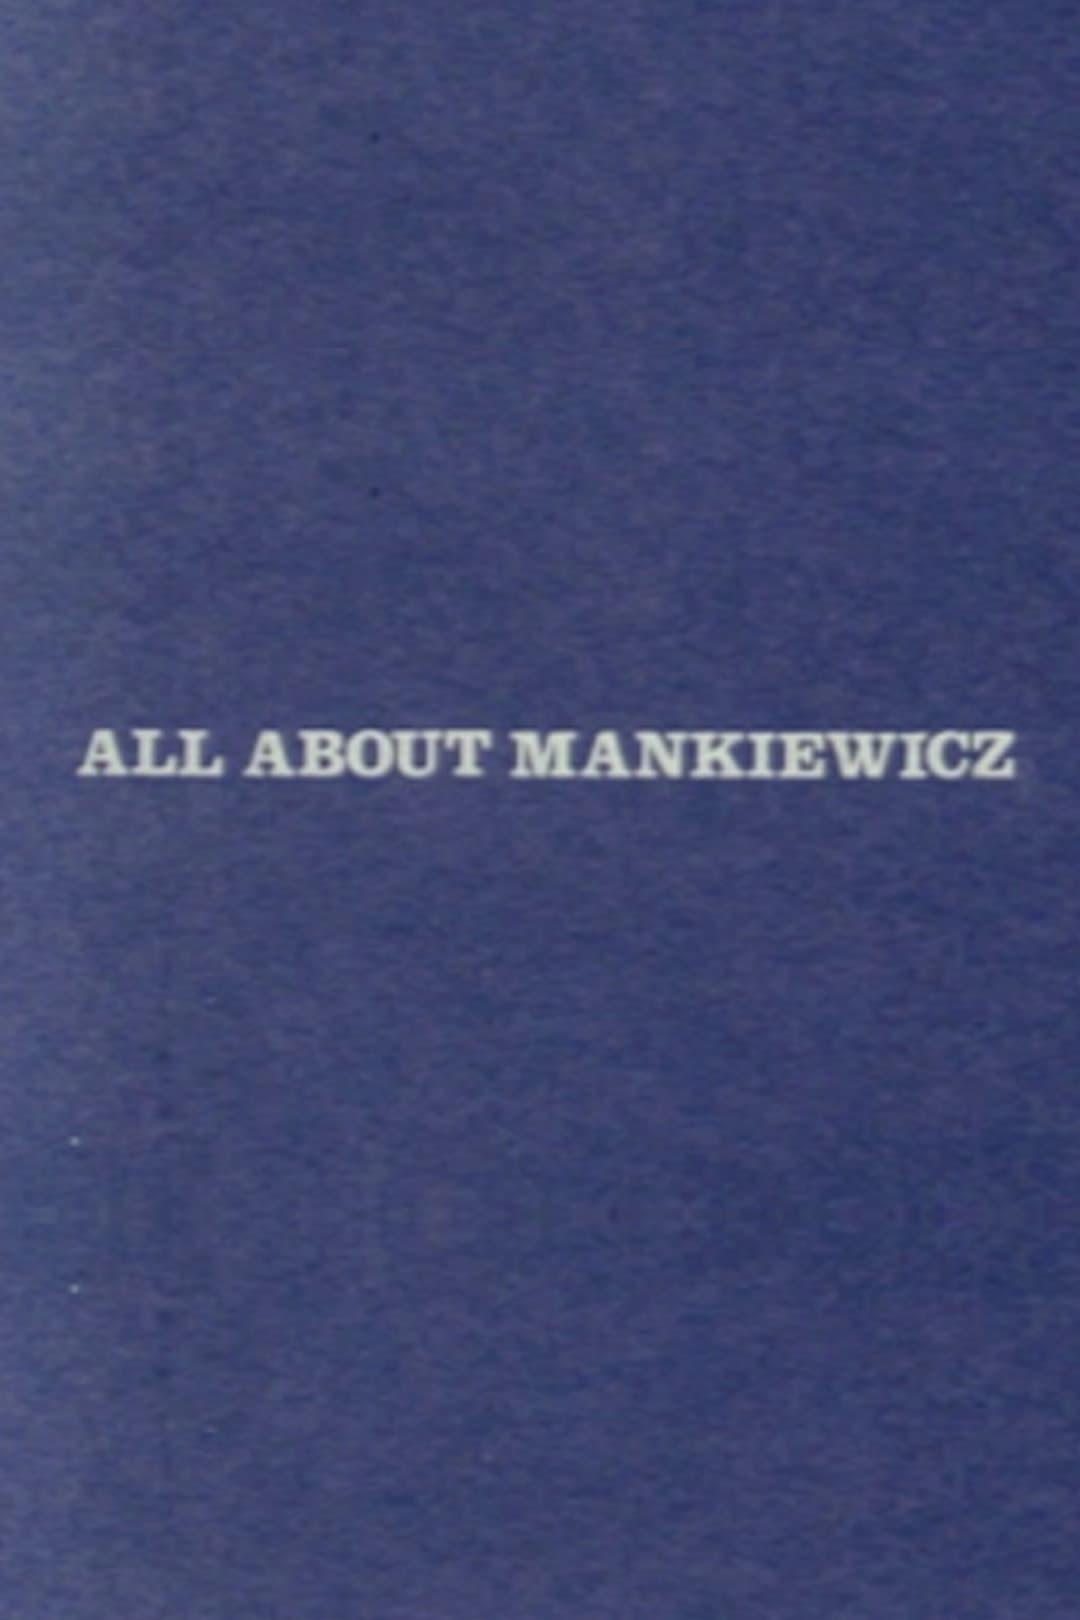 All About Mankiewicz poster